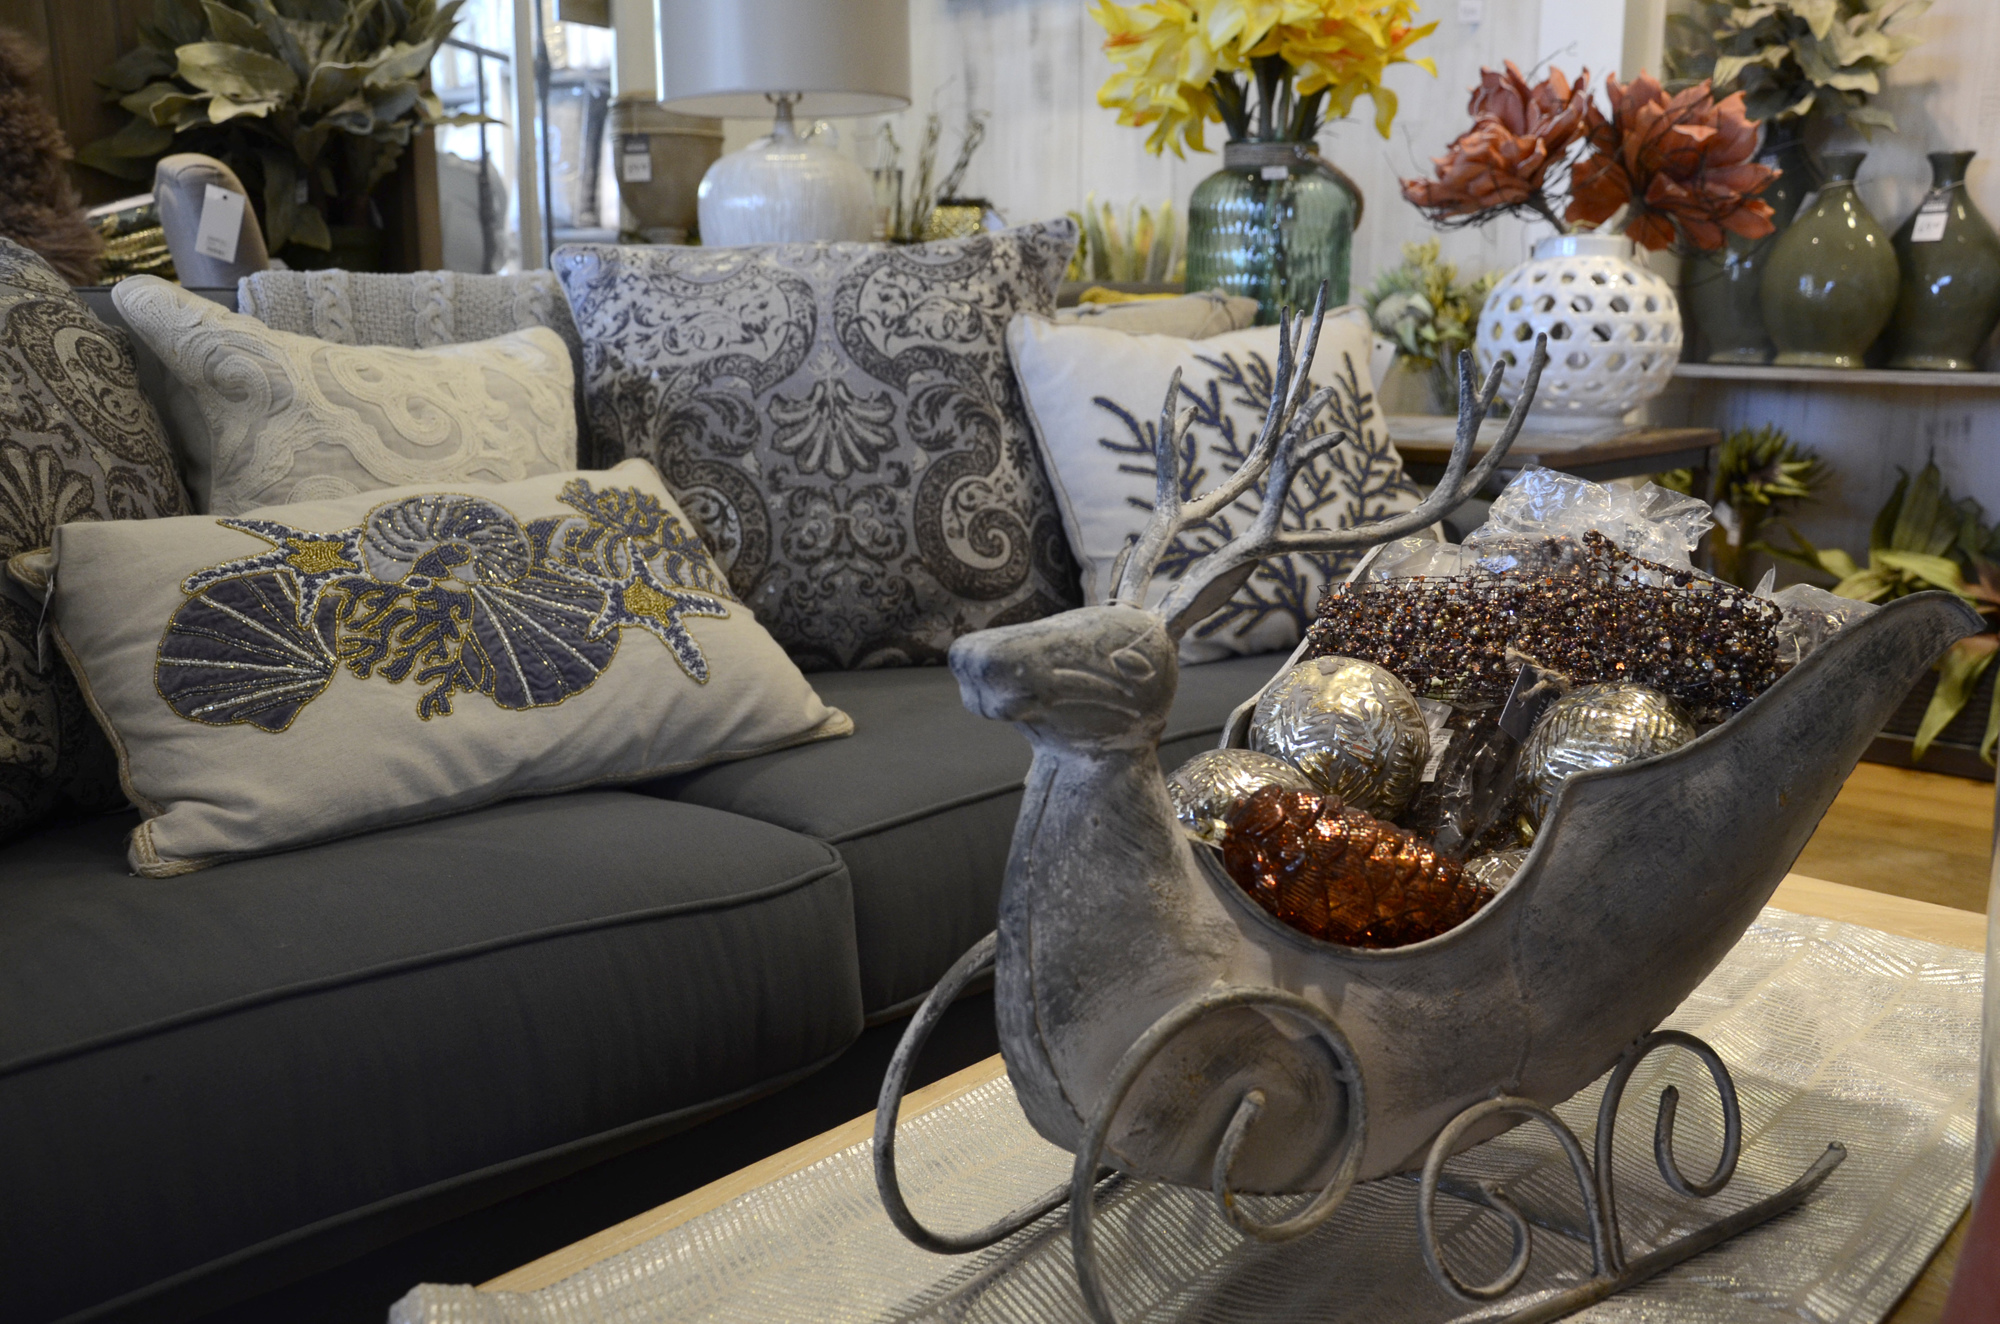 A simple, elegant coffee table decoration can add a touch of festivity to a room.